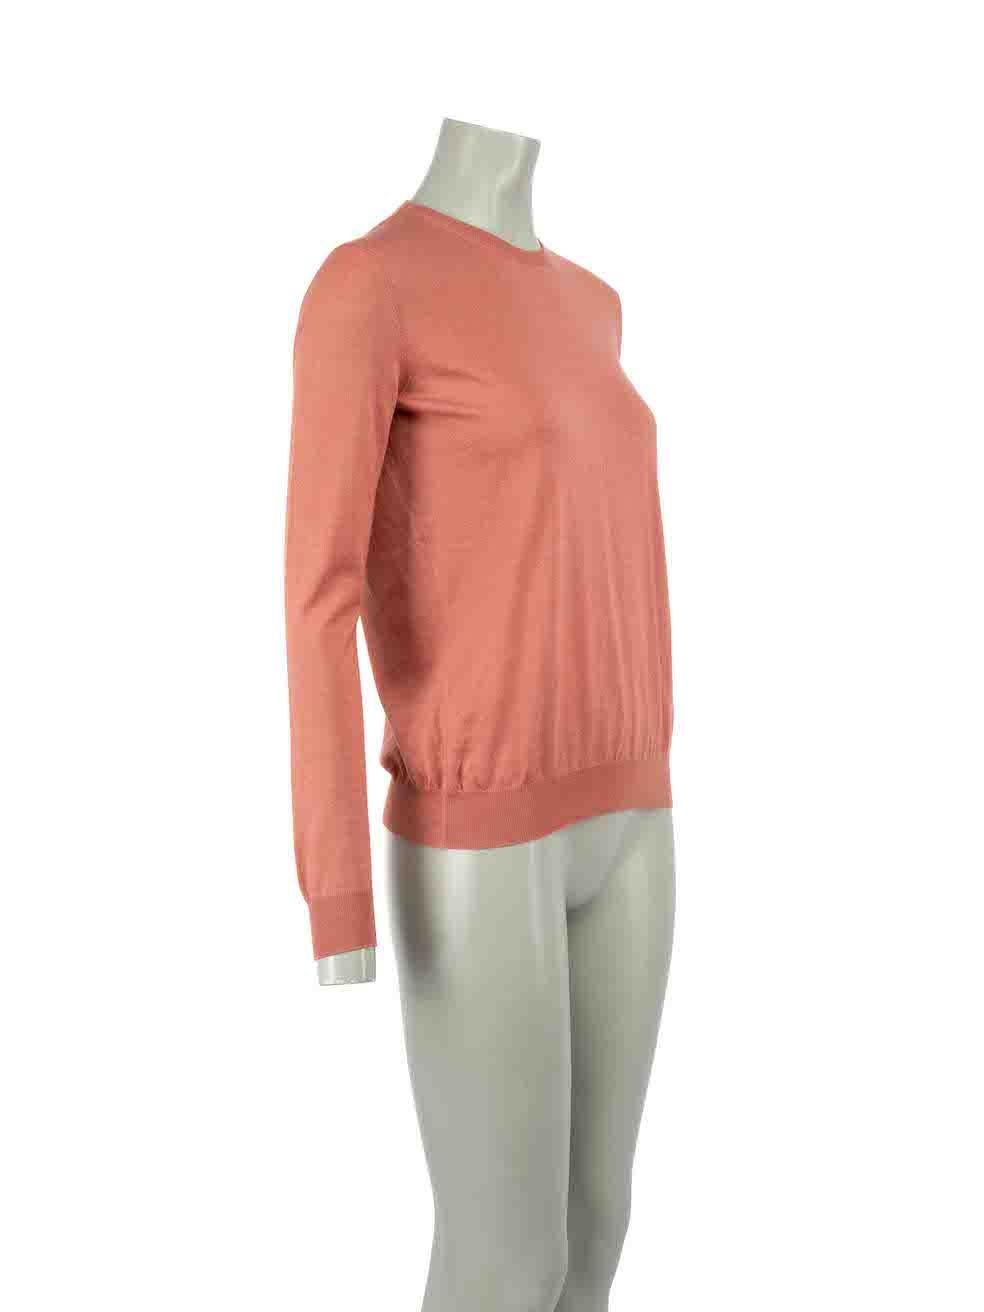 CONDITION is Very good. Minimal wear to knitwear is evident. Minimal wear to composition with negligible plucking of knit found at the centre front on this used Tom Ford designer resale item.
 
 Details
 Pink
 Synthetic
 Knit jumper
 Long sleeves
